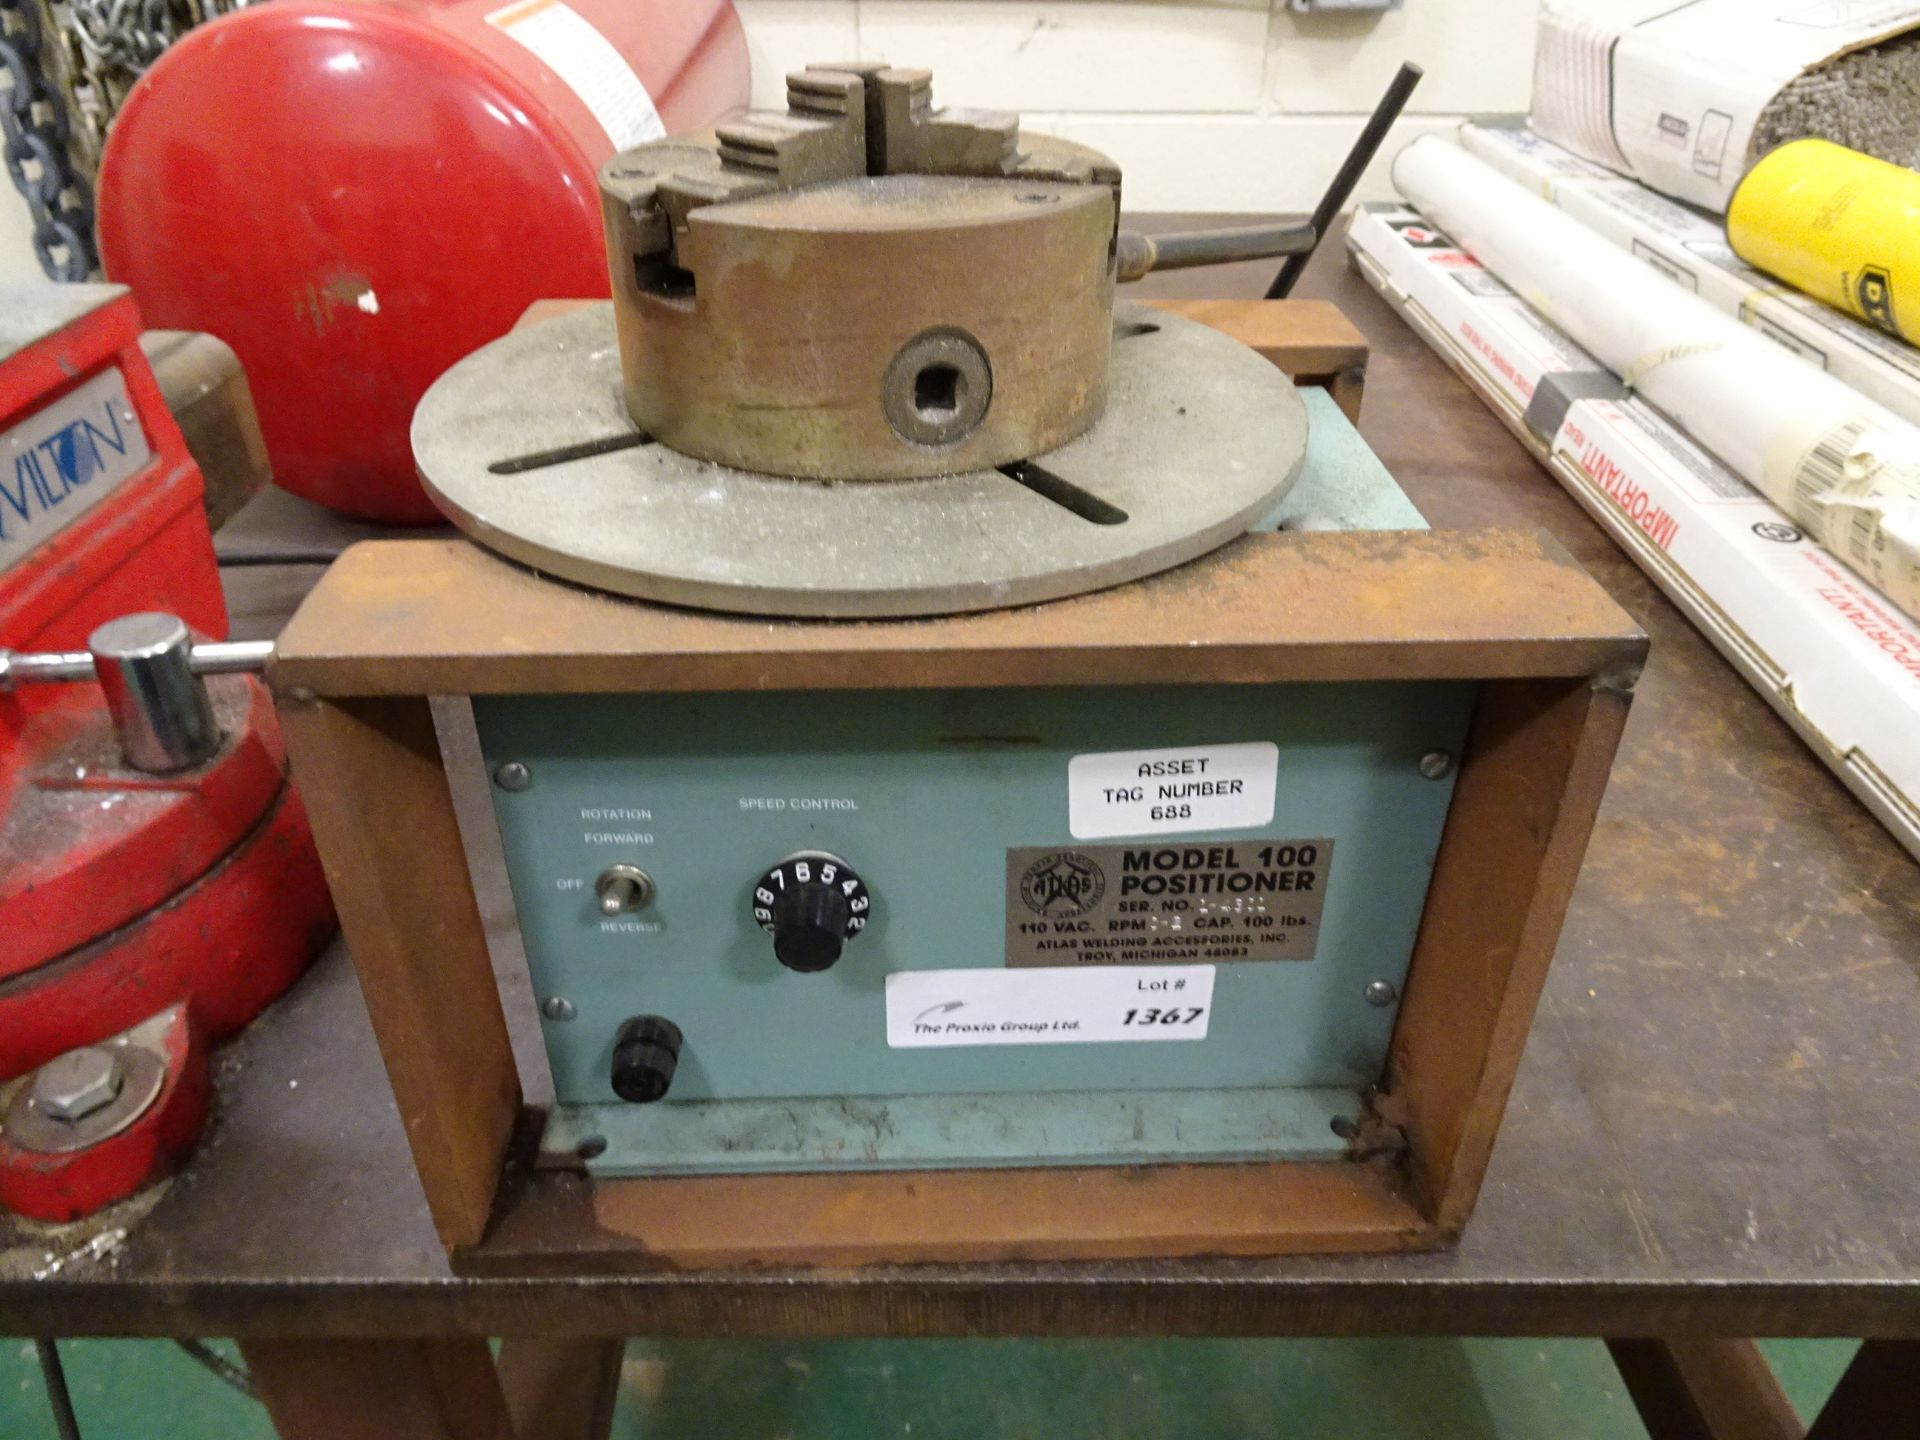 (1) Atlas Welding Accessories Model 100 Positioner With Associated 4 In. 3-Jaw Chuck